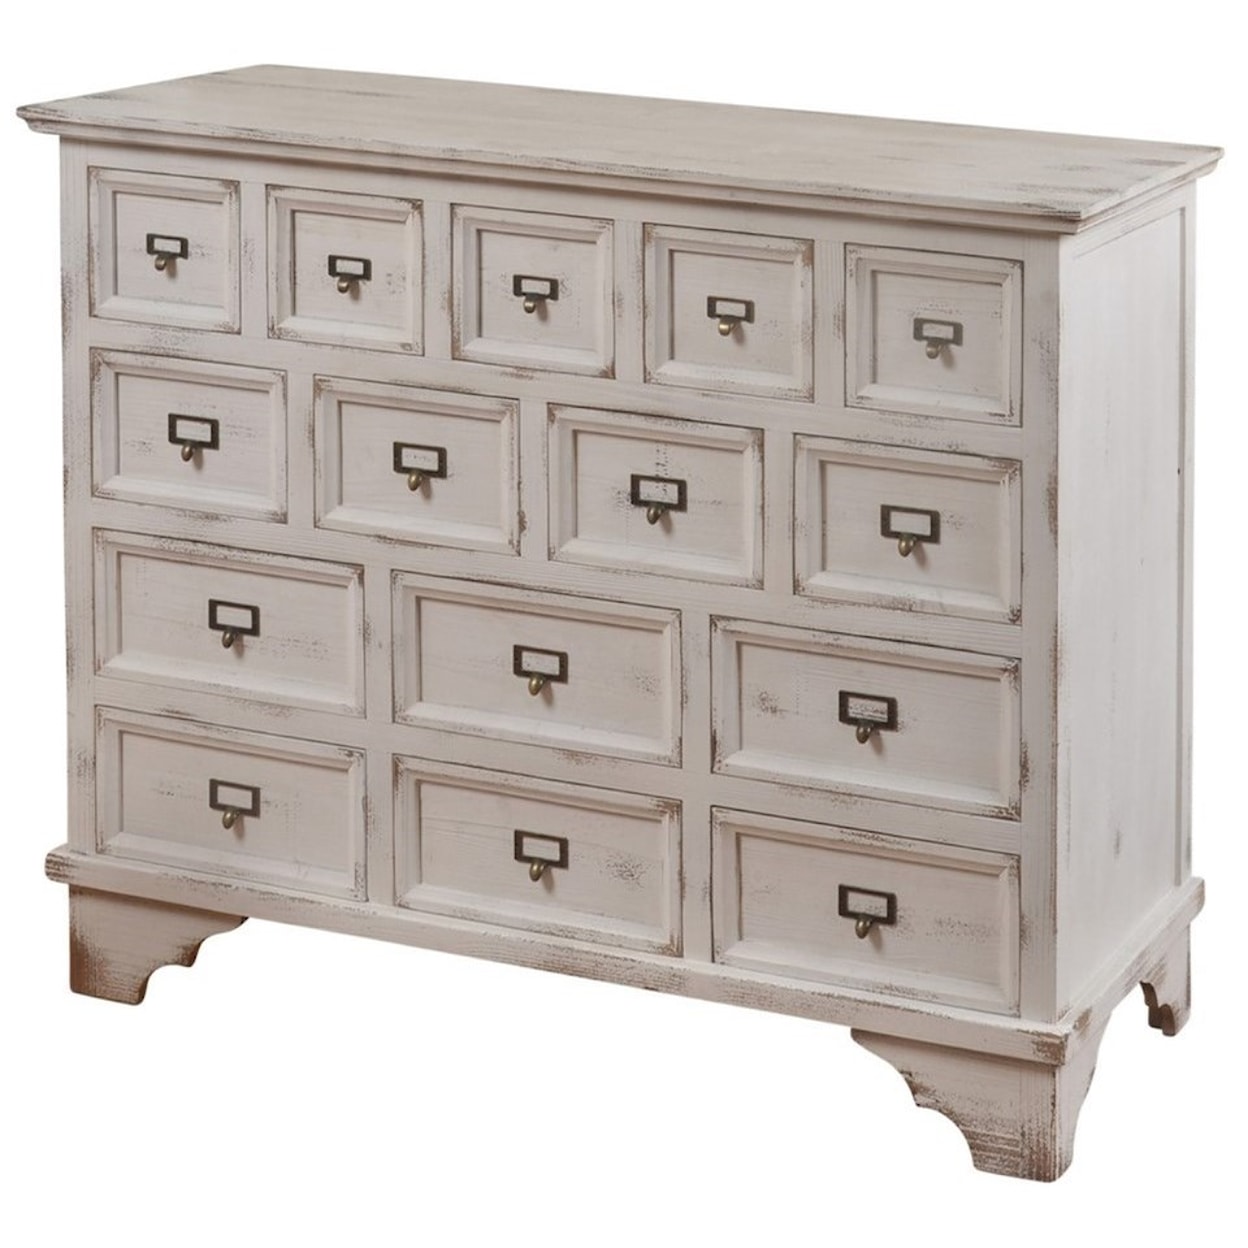 StyleCraft Occasional Cabinets Shabby Chic Apothacary Cabinet